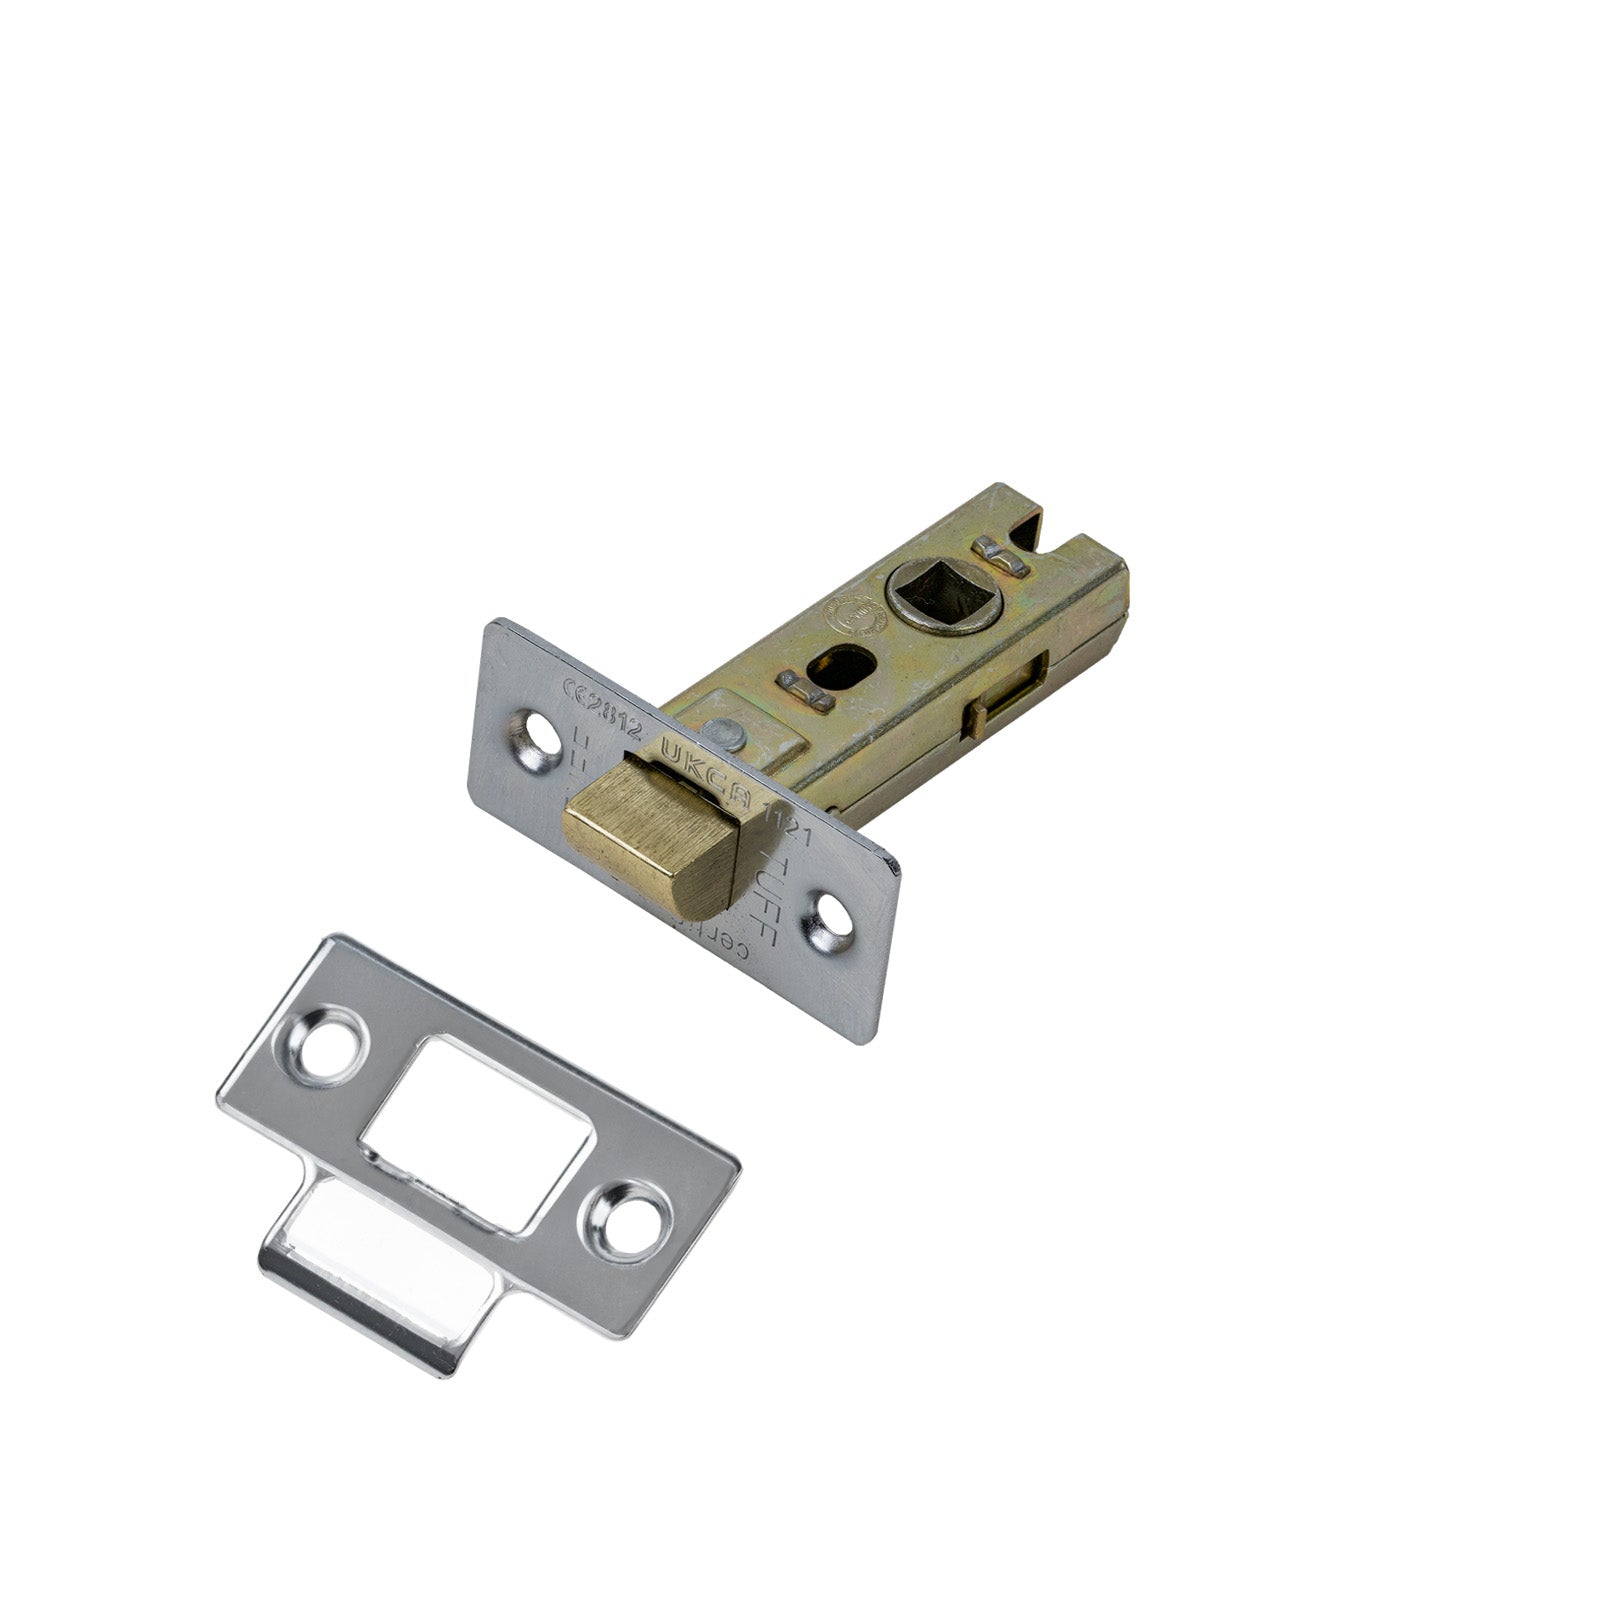 SHOW Tubular Latch - 2.5 Inch with Polished Chrome finished forend and striker plate